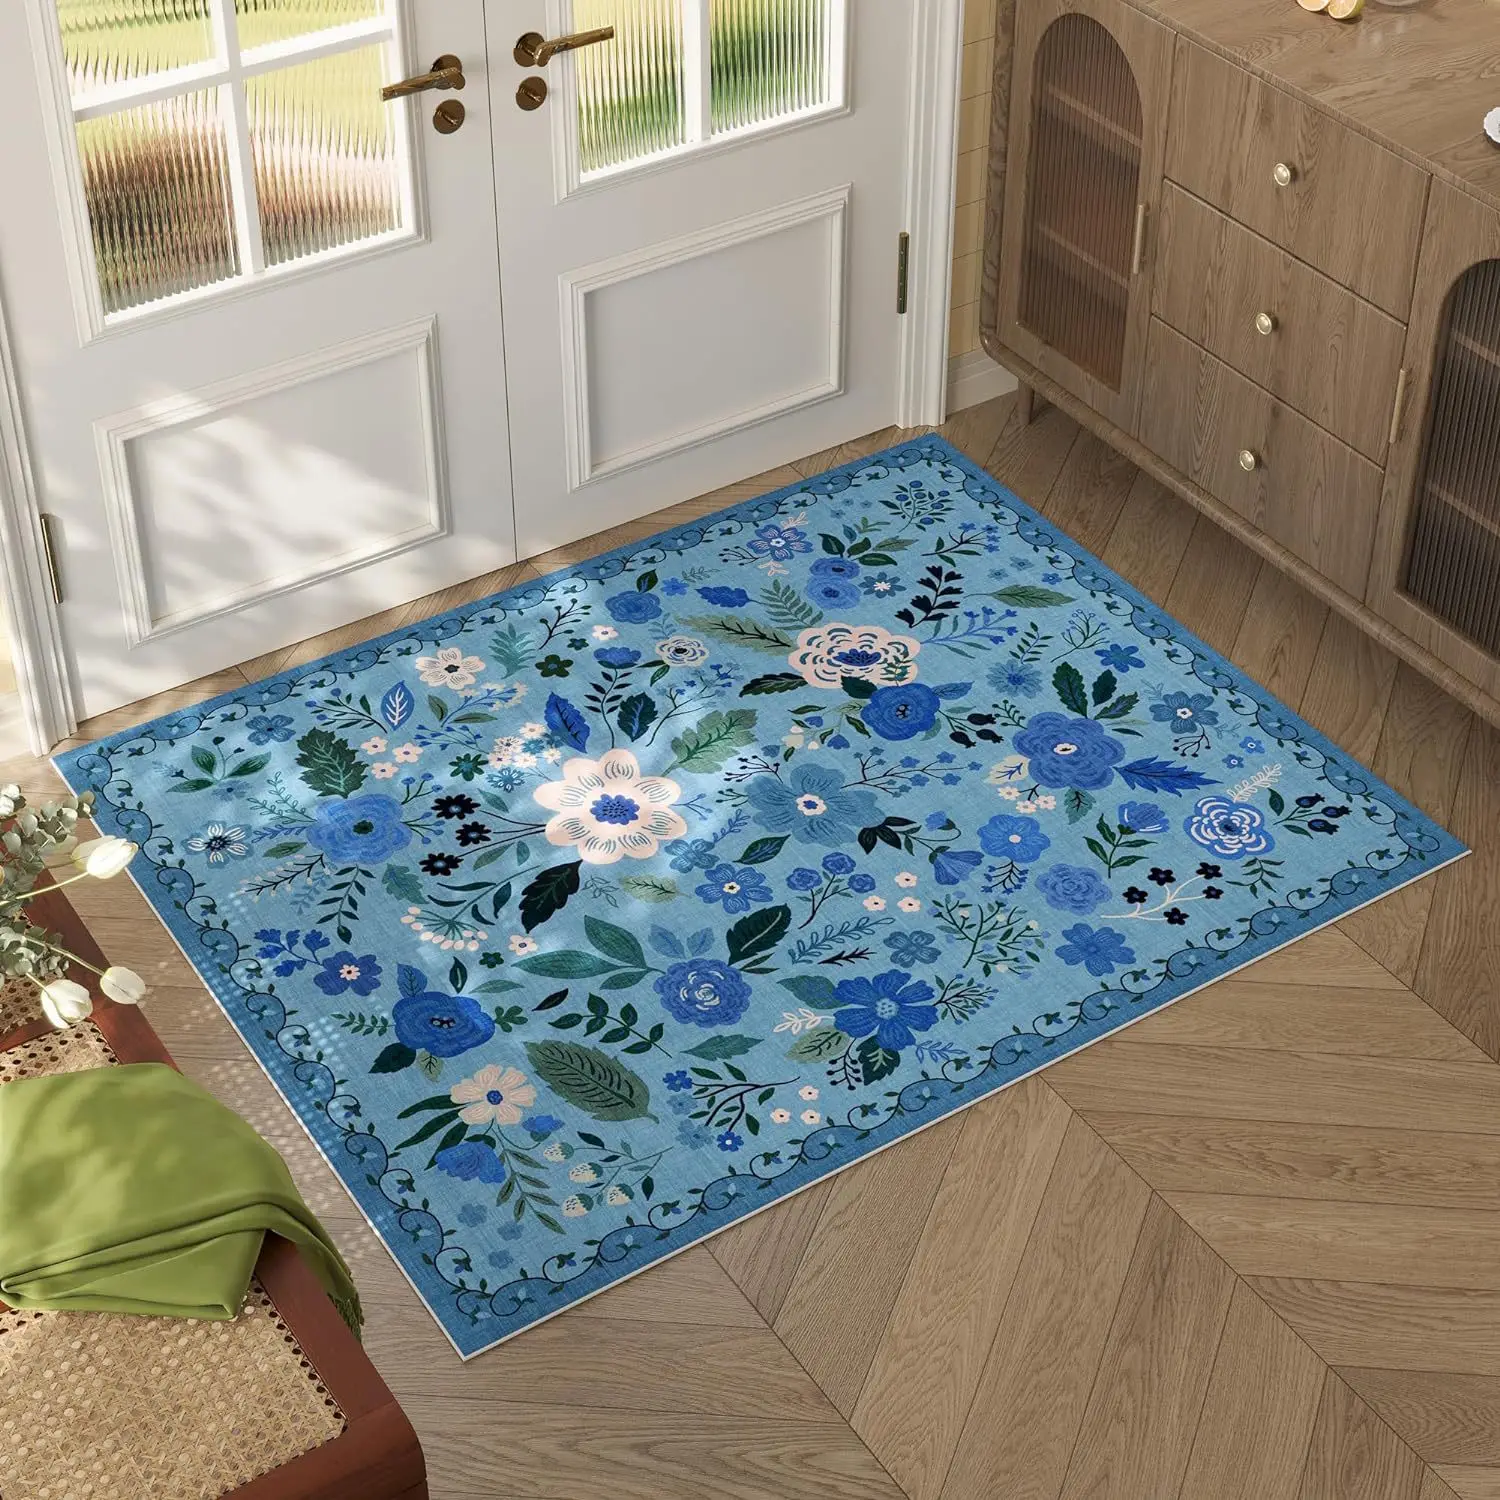 

MiRcle Sweet Soft Carpets For Living Room Bedroom Blue Room Rugs Home Decor Hair Easy Clean Flower Area Rug Indoor Mat Thicker